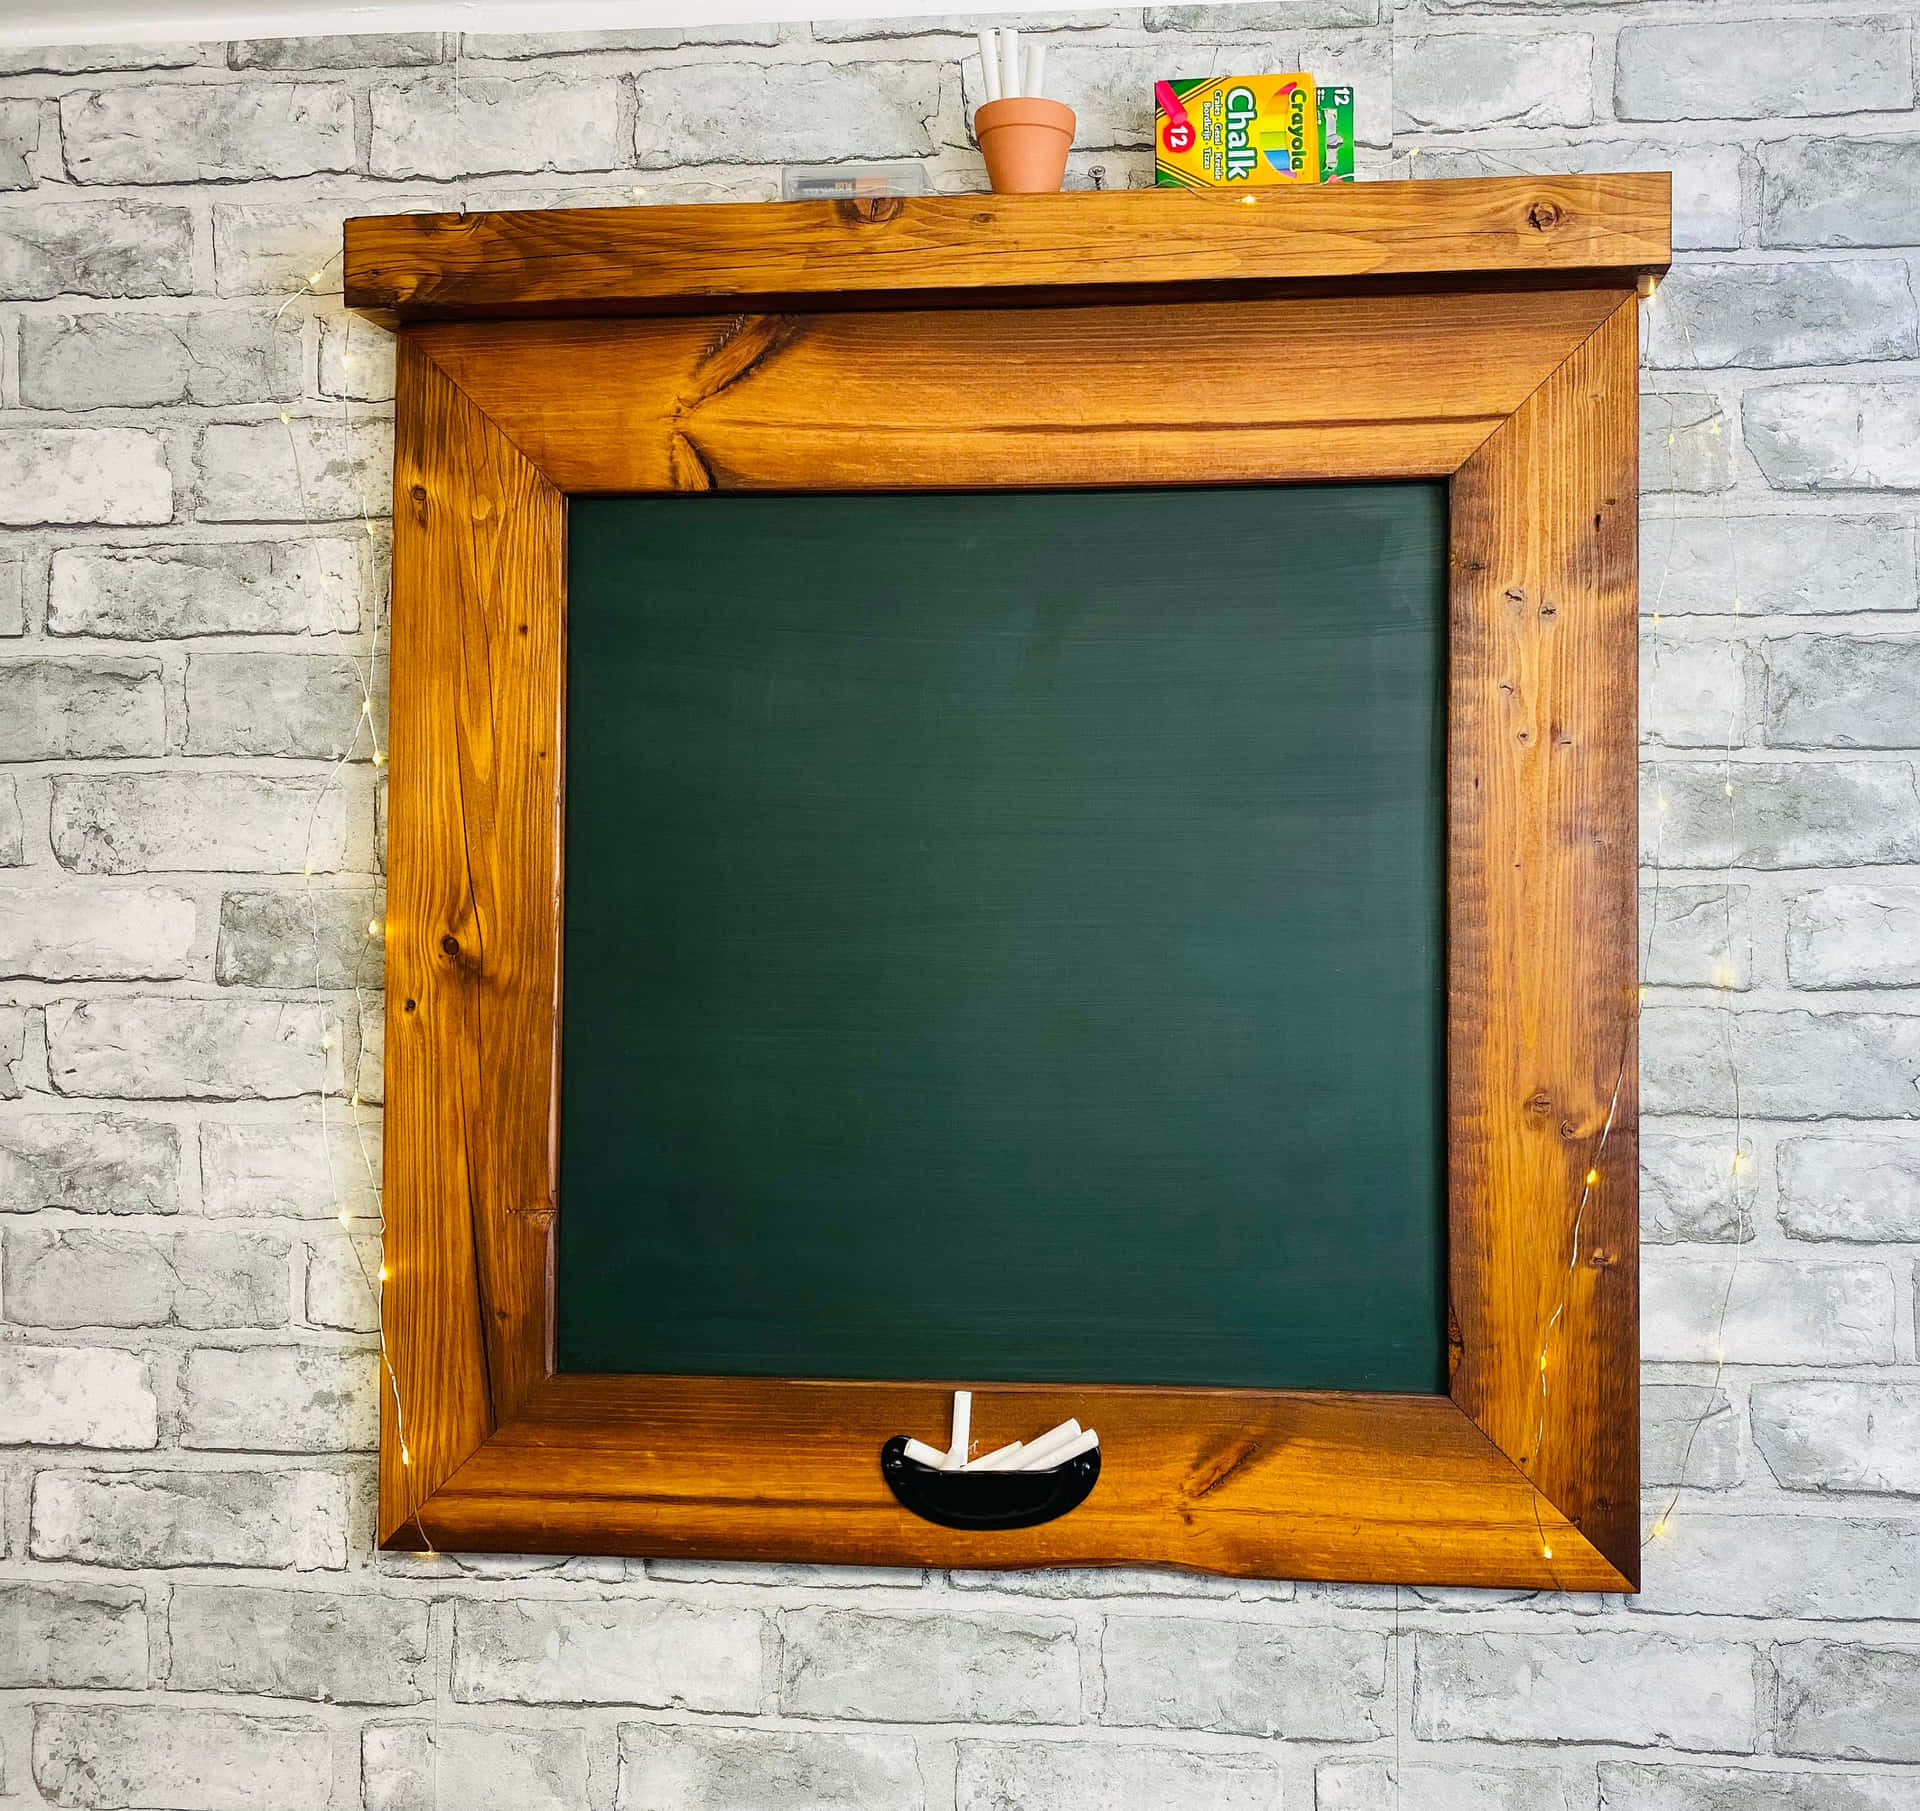 A classic green chalkboard backdrop to note ideas and experiences